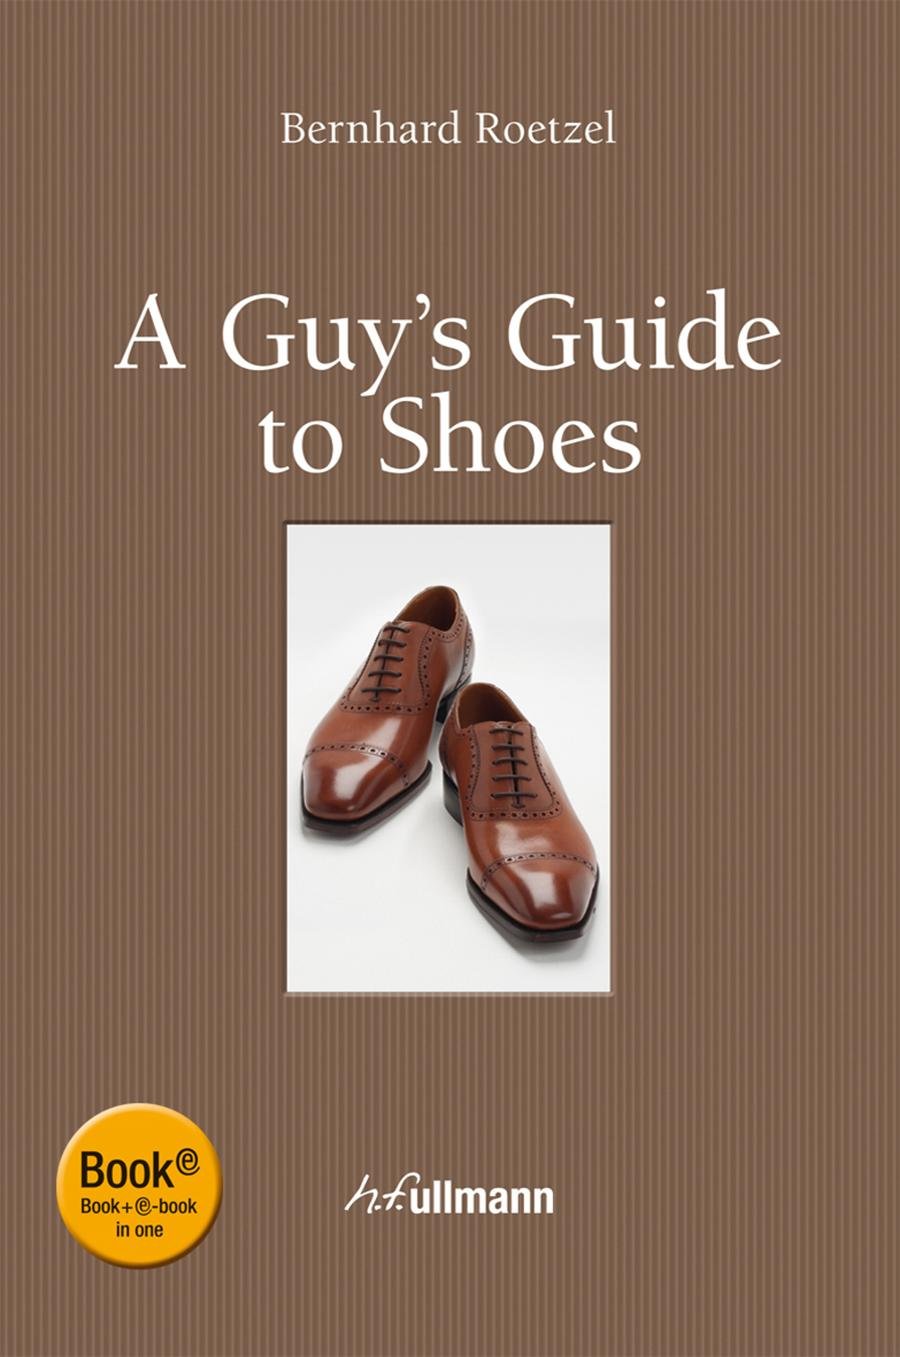 A Guy’s Guide to Shoes